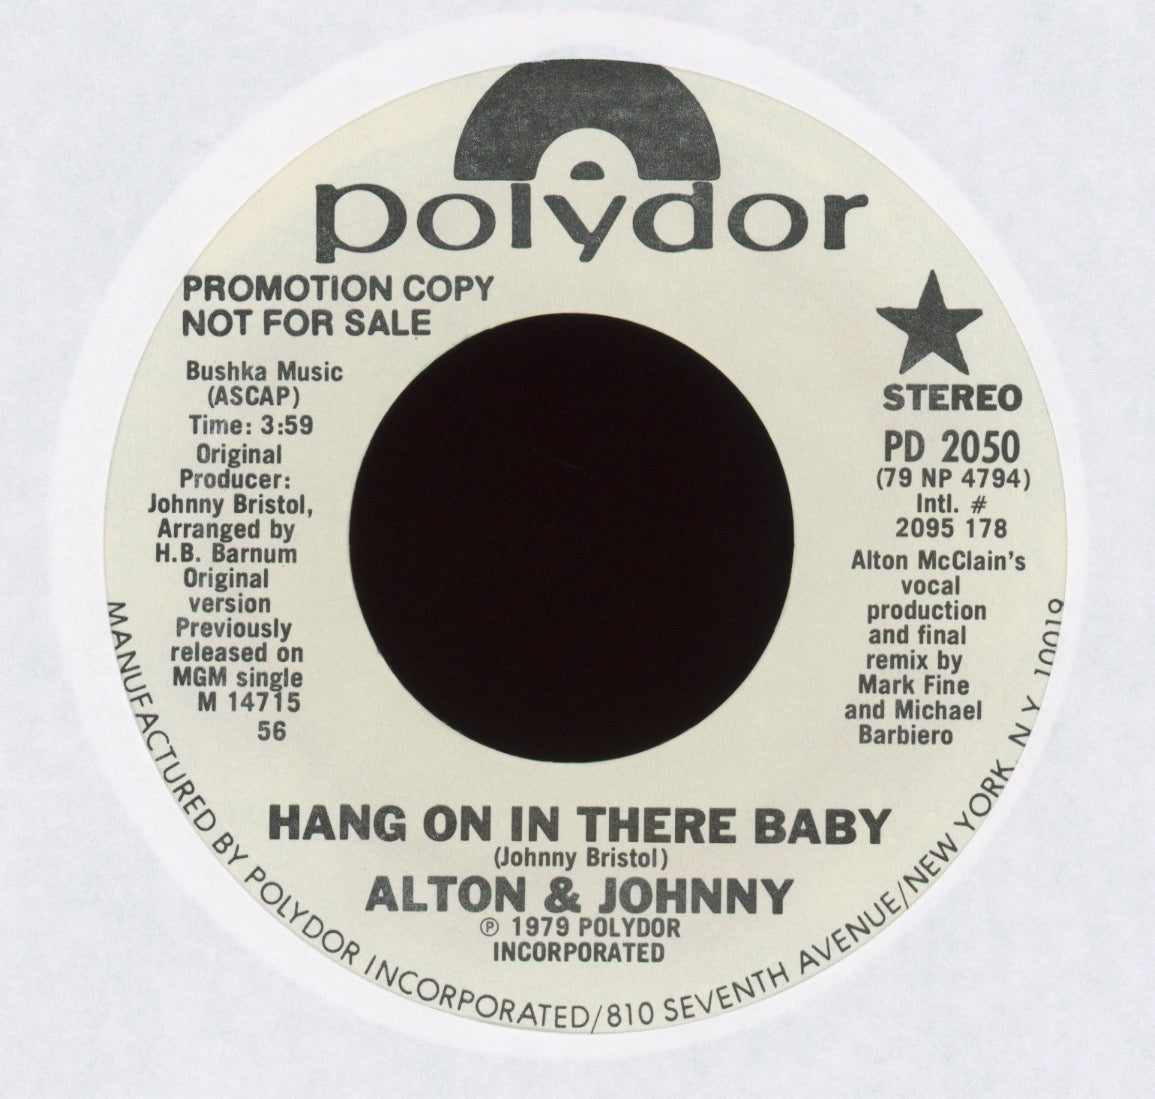 Alton McClain & Johnny - Hang On In There Baby on Polydor Promo